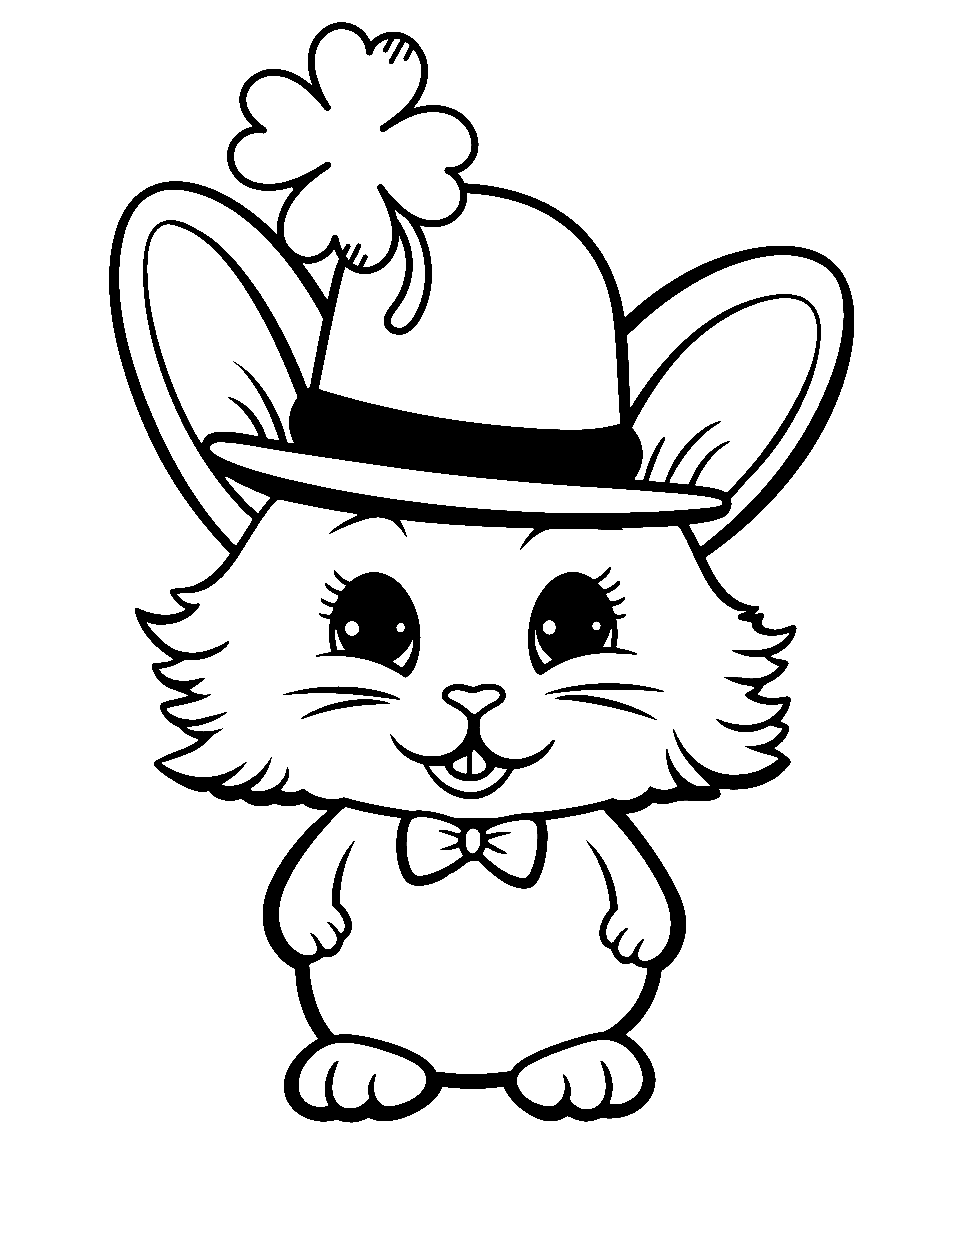 Bunny with a Leprechaun Hat Coloring Page - A fluffy bunny with a tiny leprechaun hat.